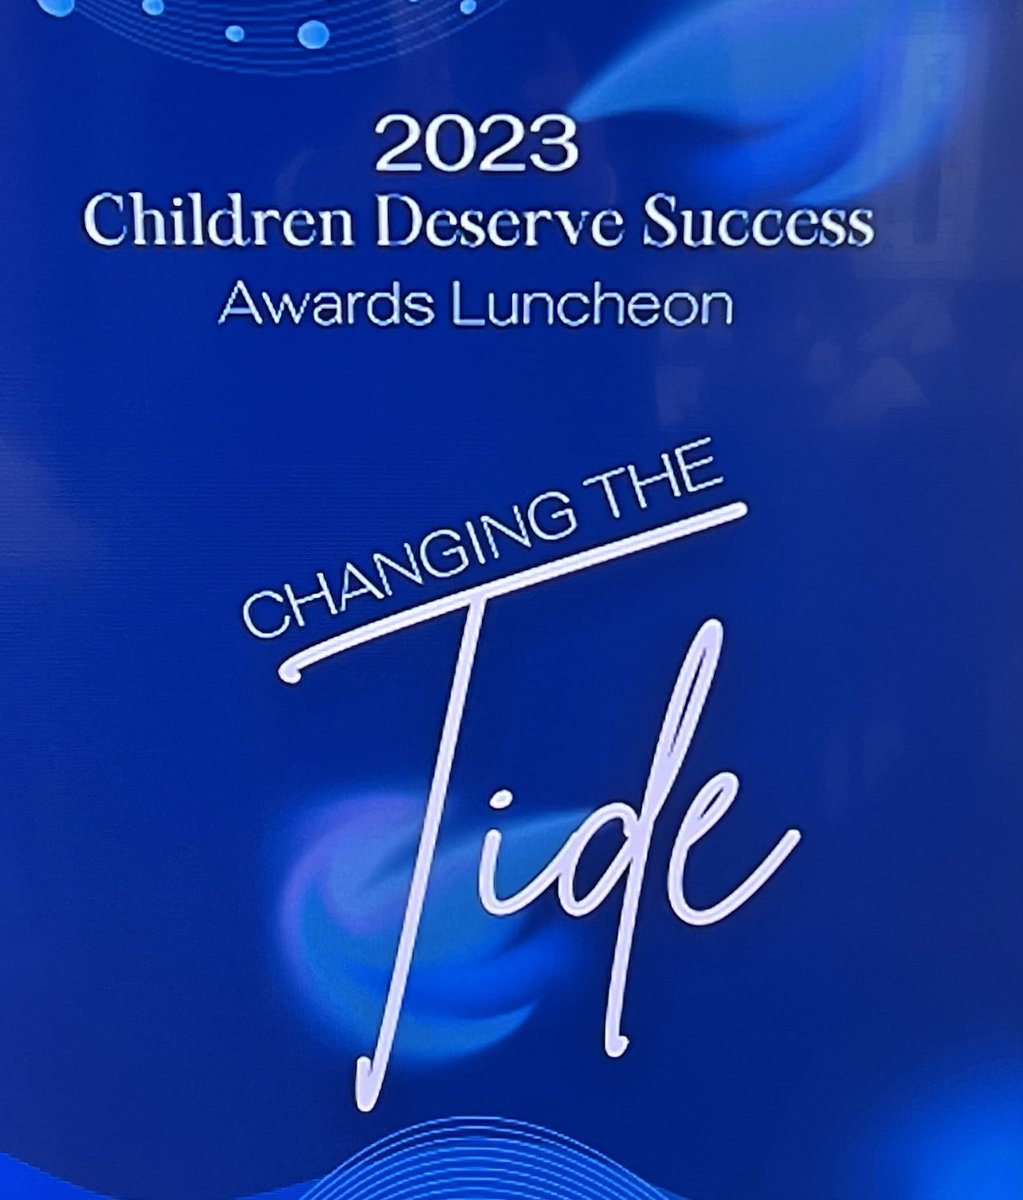 This afternoon it was an honor to recognition the recipients at the “Children Deserve Success Award Luncheon”. The award for going ABOVE & BEYOND presented to SBCOUNTY~Deputy Chief, Chiefs, Capt., Det. & SBCOES. Congratulations!